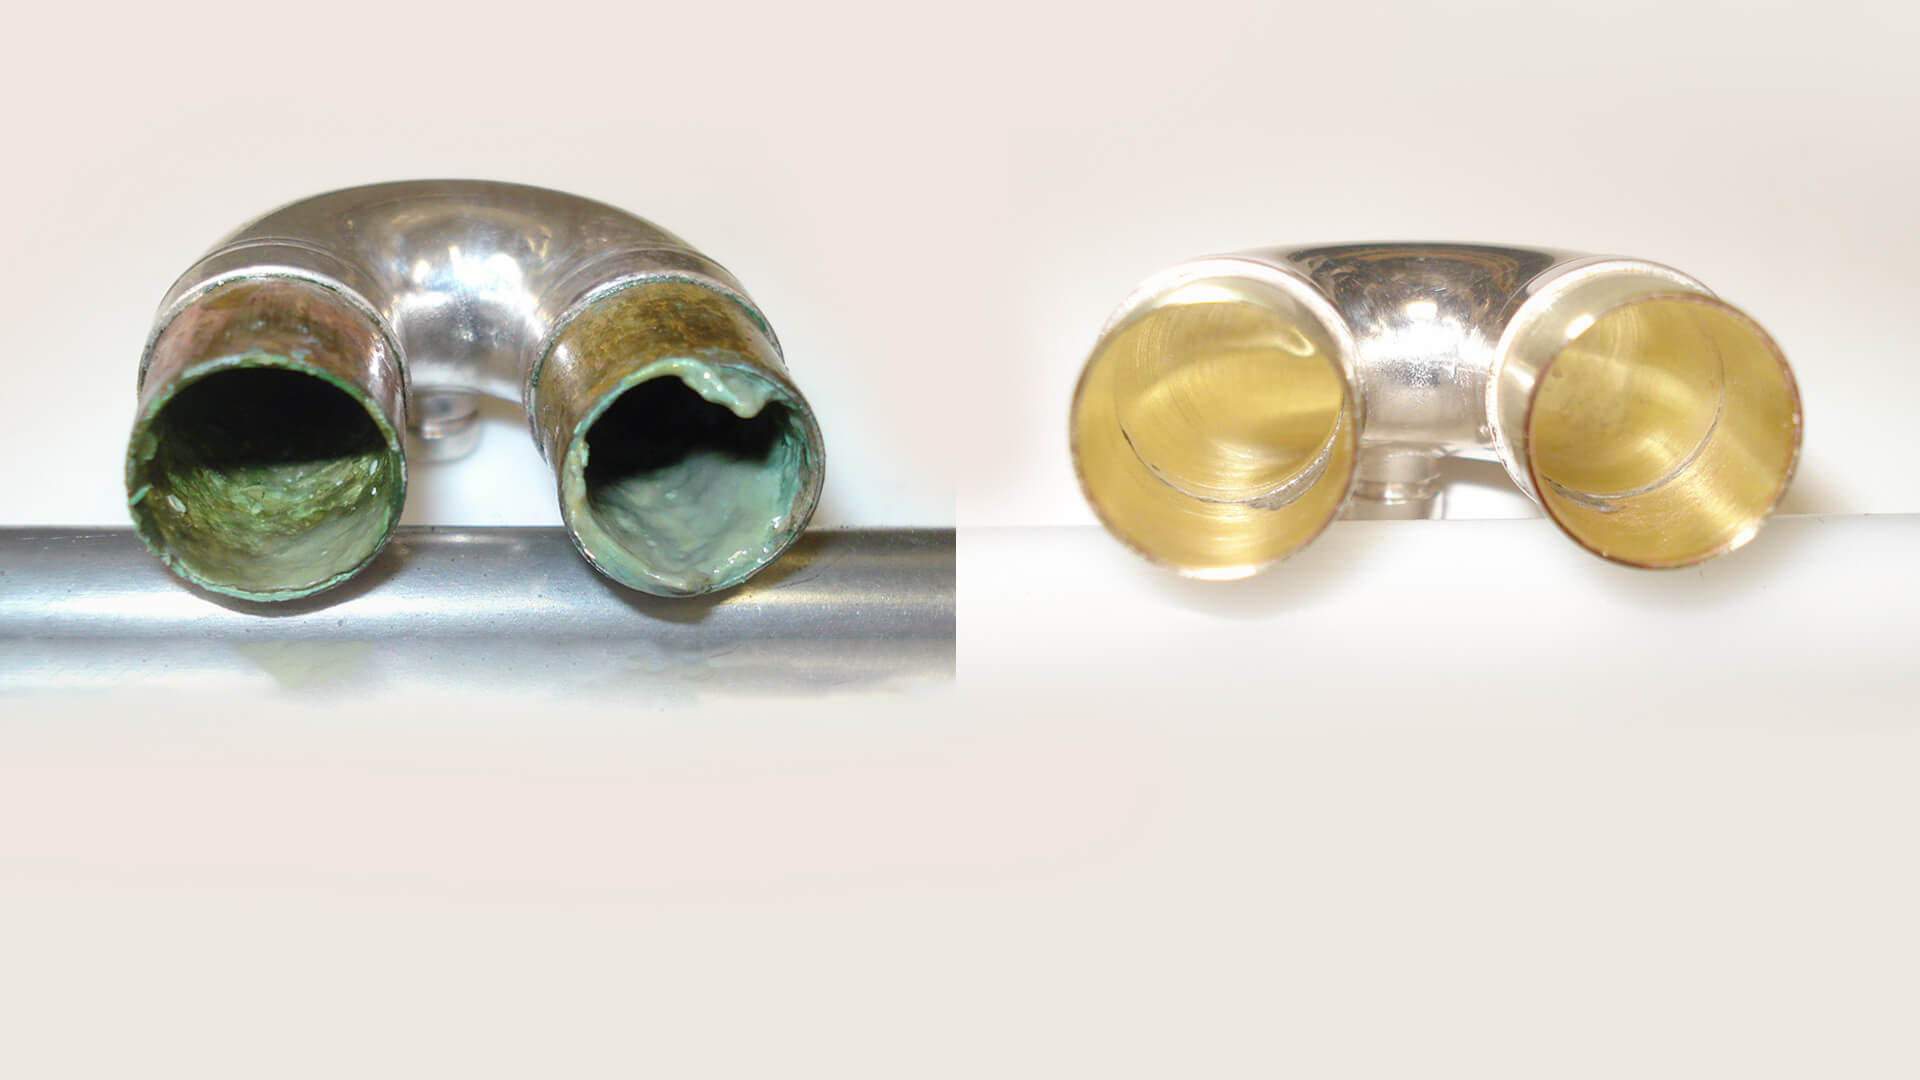 Trumpet before after ultrasonic cleaning